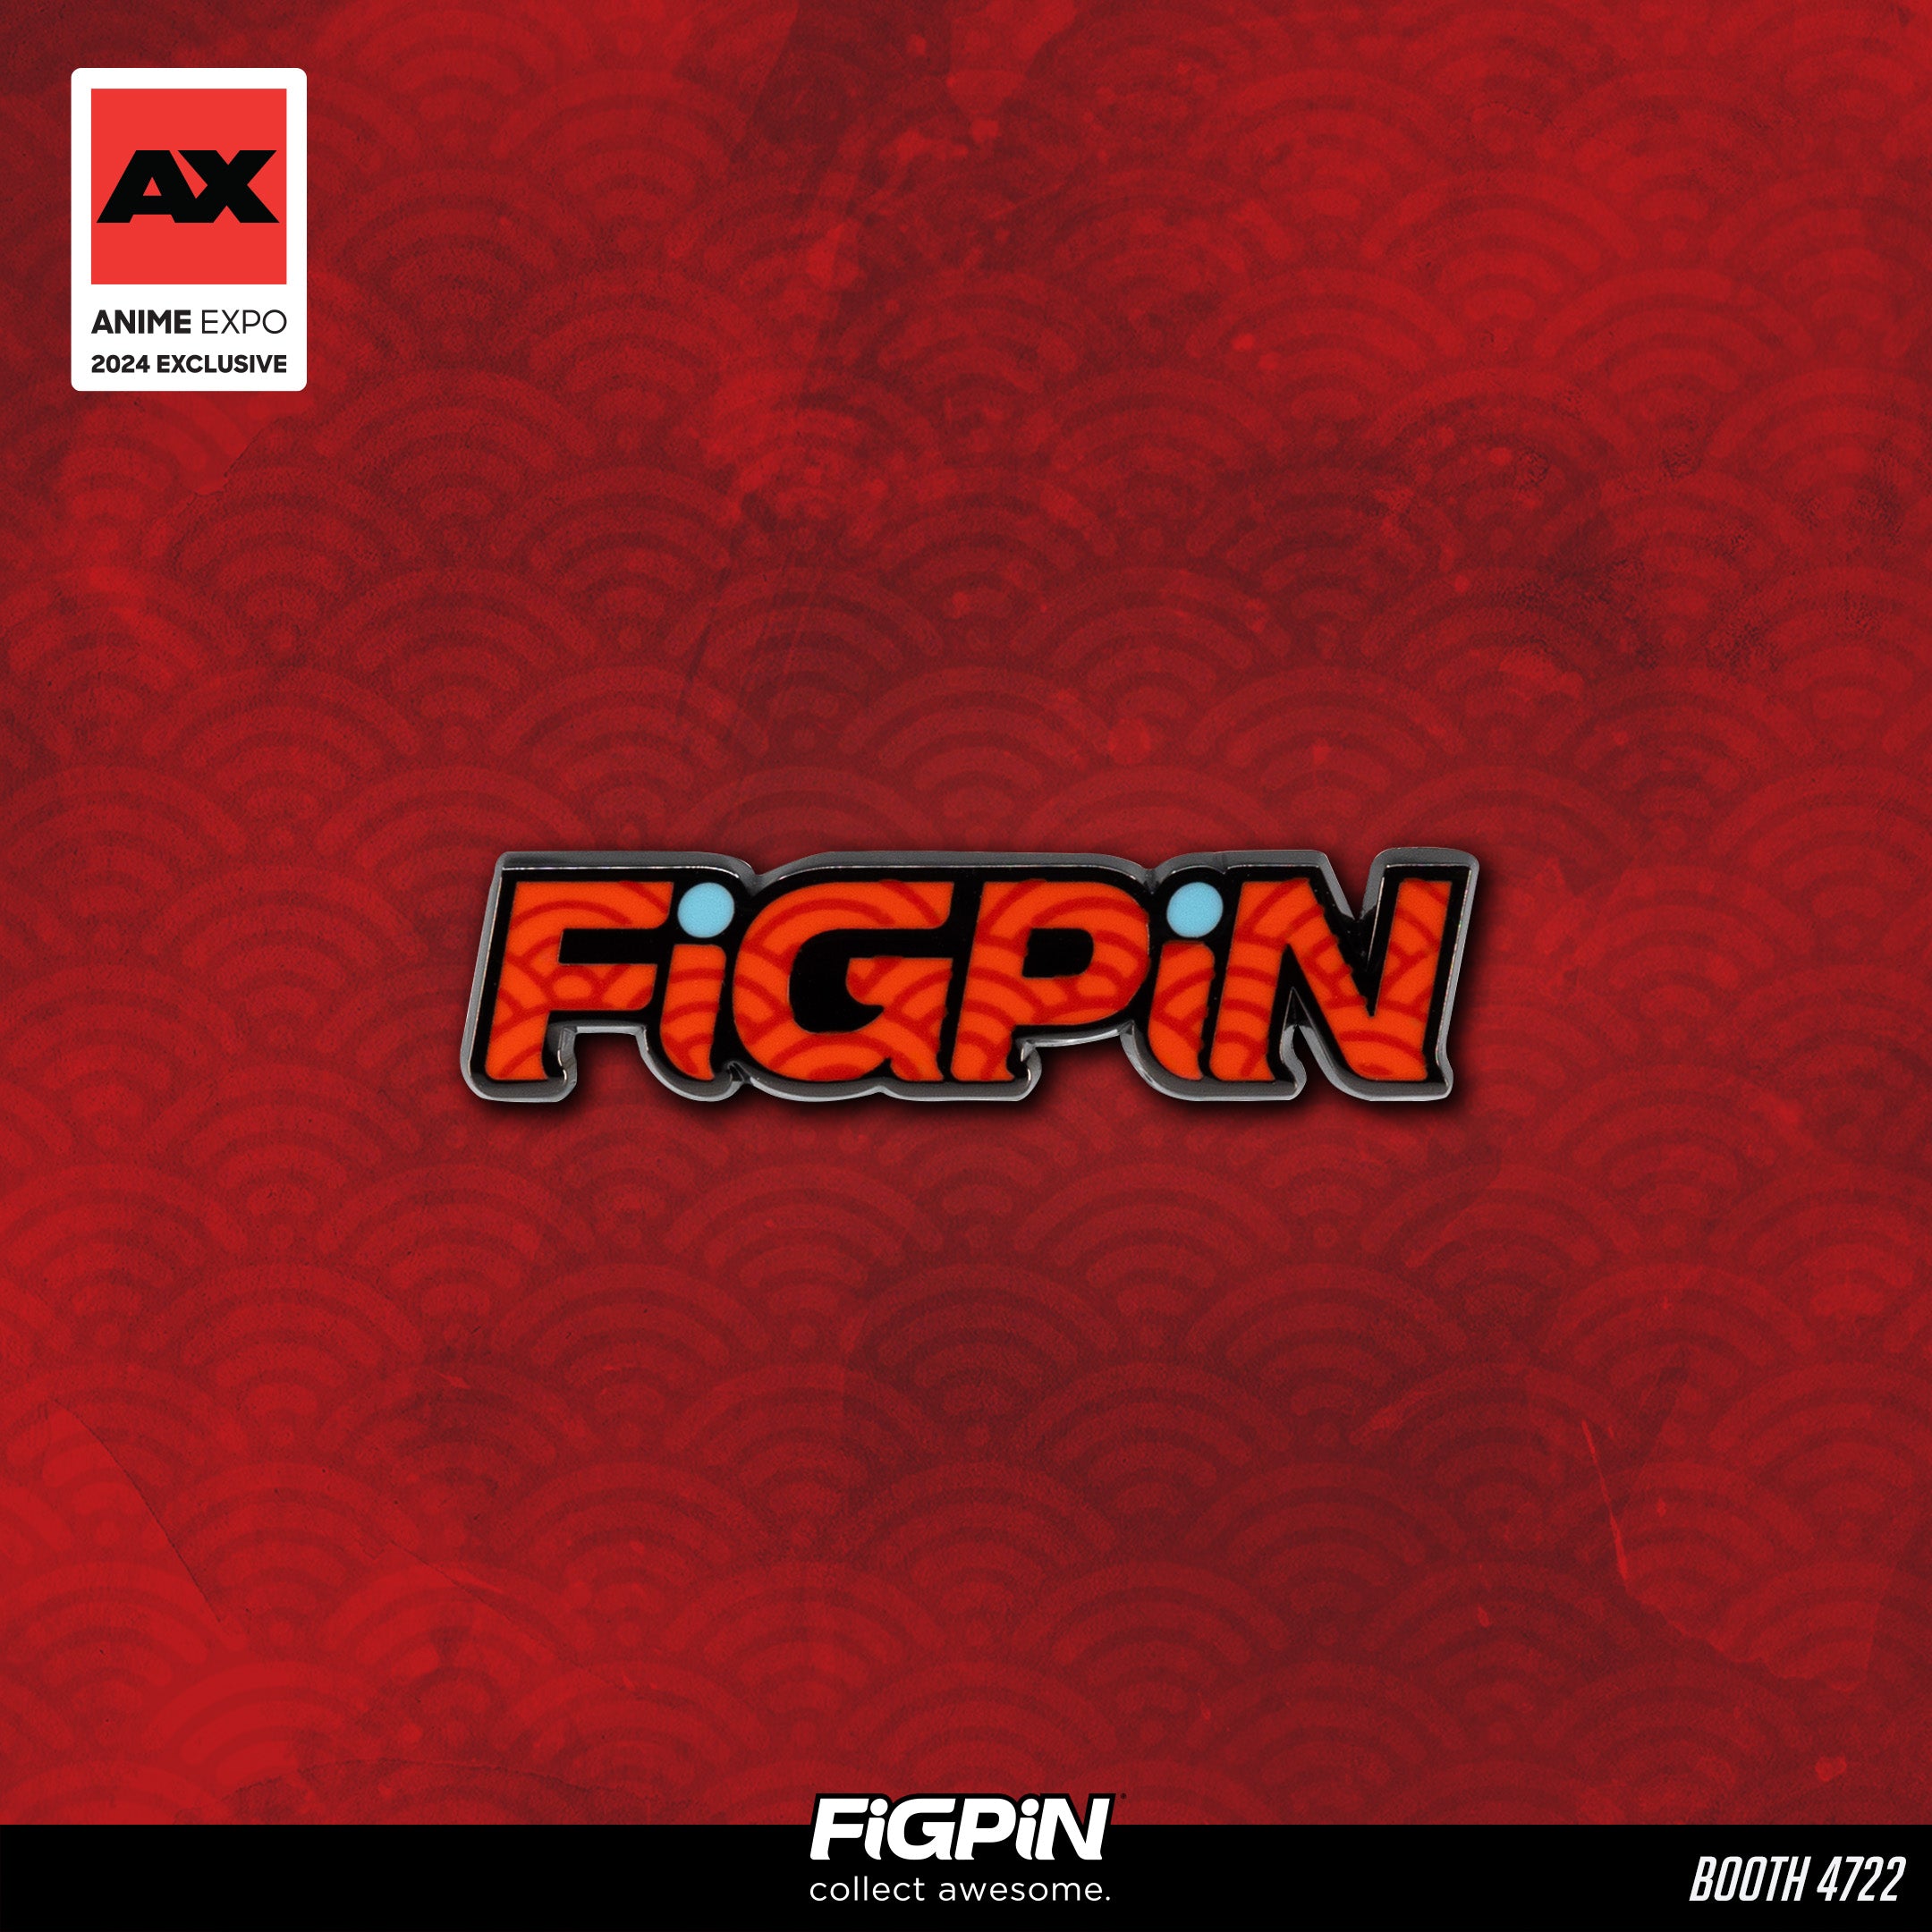 Visit FiGPiN during Anime Expo Weekend!